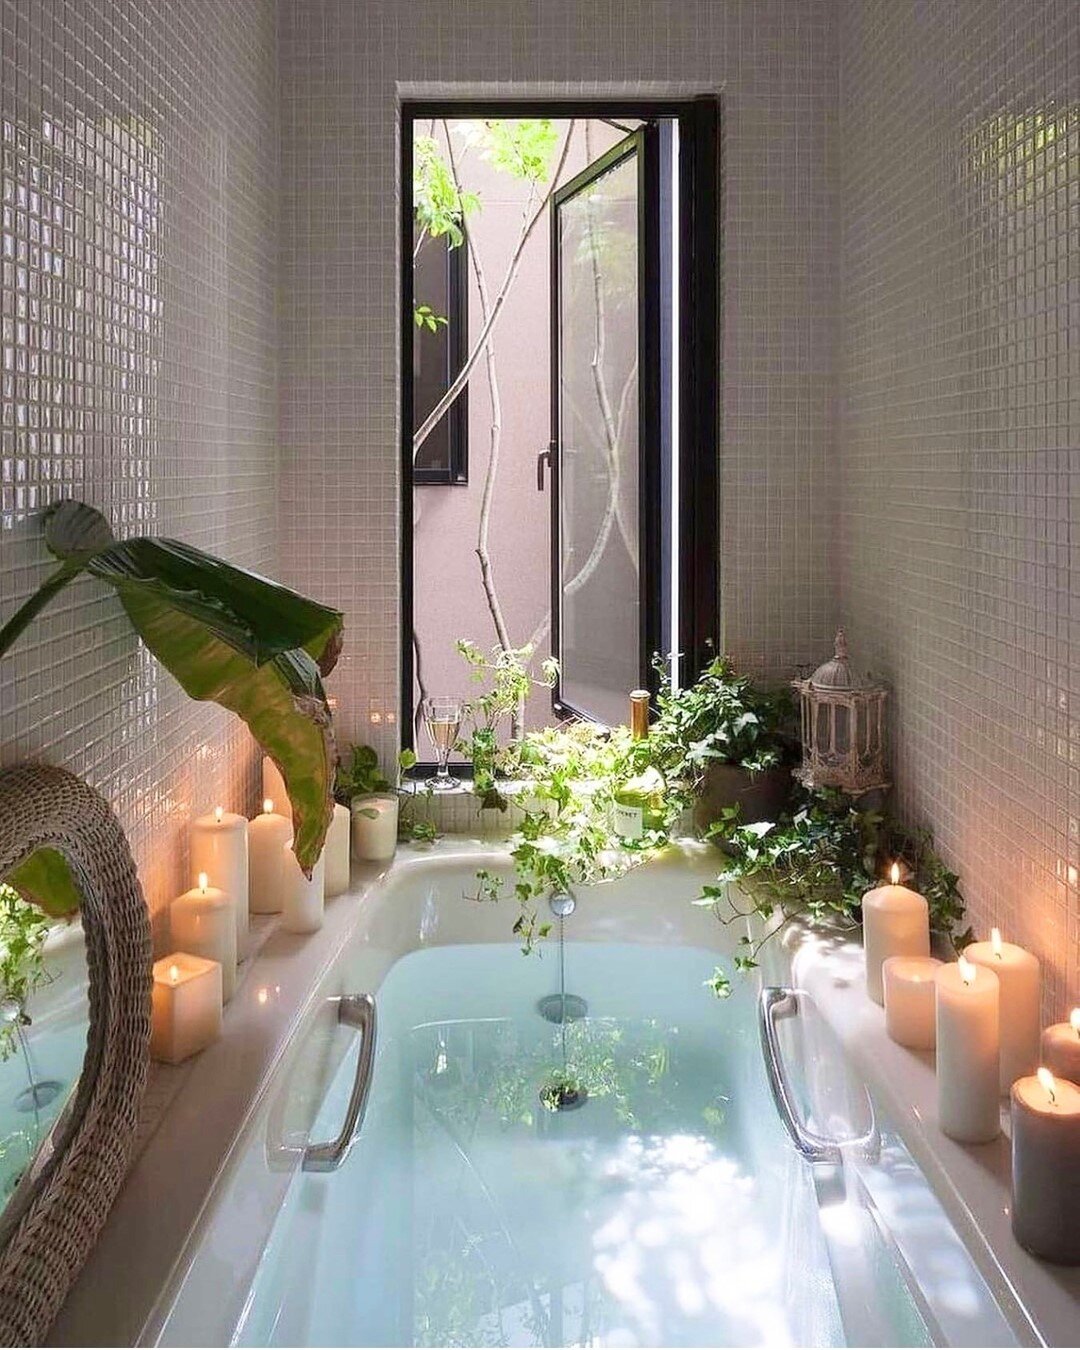 Summertime getaway vibes to inspire your next trip or staycation #selfcaregoals⠀⠀⠀⠀⠀⠀⠀⠀⠀
. ⠀⠀⠀⠀⠀⠀⠀⠀⠀
. ⠀⠀⠀⠀⠀⠀⠀⠀⠀
. ⠀⠀⠀⠀⠀⠀⠀⠀⠀
. ⠀⠀⠀⠀⠀⠀⠀⠀⠀
 #bathroomgoals #beautygoals #selfcarefirst #selfcareday #selfcaredaily #selfcarelove #relaxing #selfcareeveryday